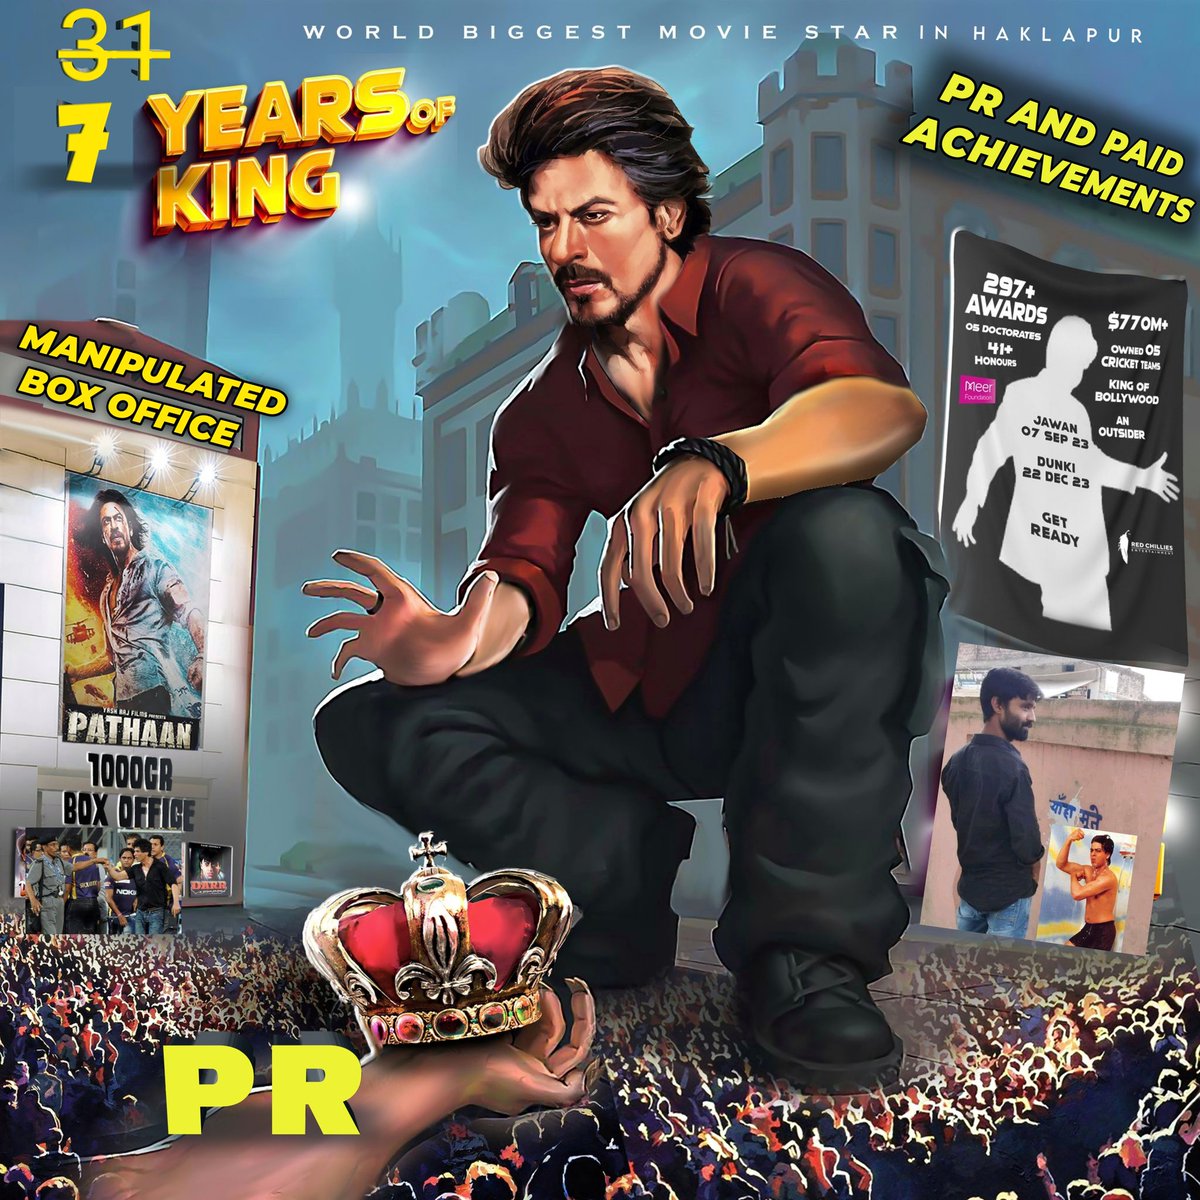 Keeping All Fanwar Aside Wishing The Biggest PR Made Star #ShahRukhKhan  Congratulations For His Glorious 1 Years (2022-2023) That Too Because Of His Father #SalmanKhan  !! Hope You'll Entertain Us With More Disasters Further ❤️

#31yearsofShahRukhKhan